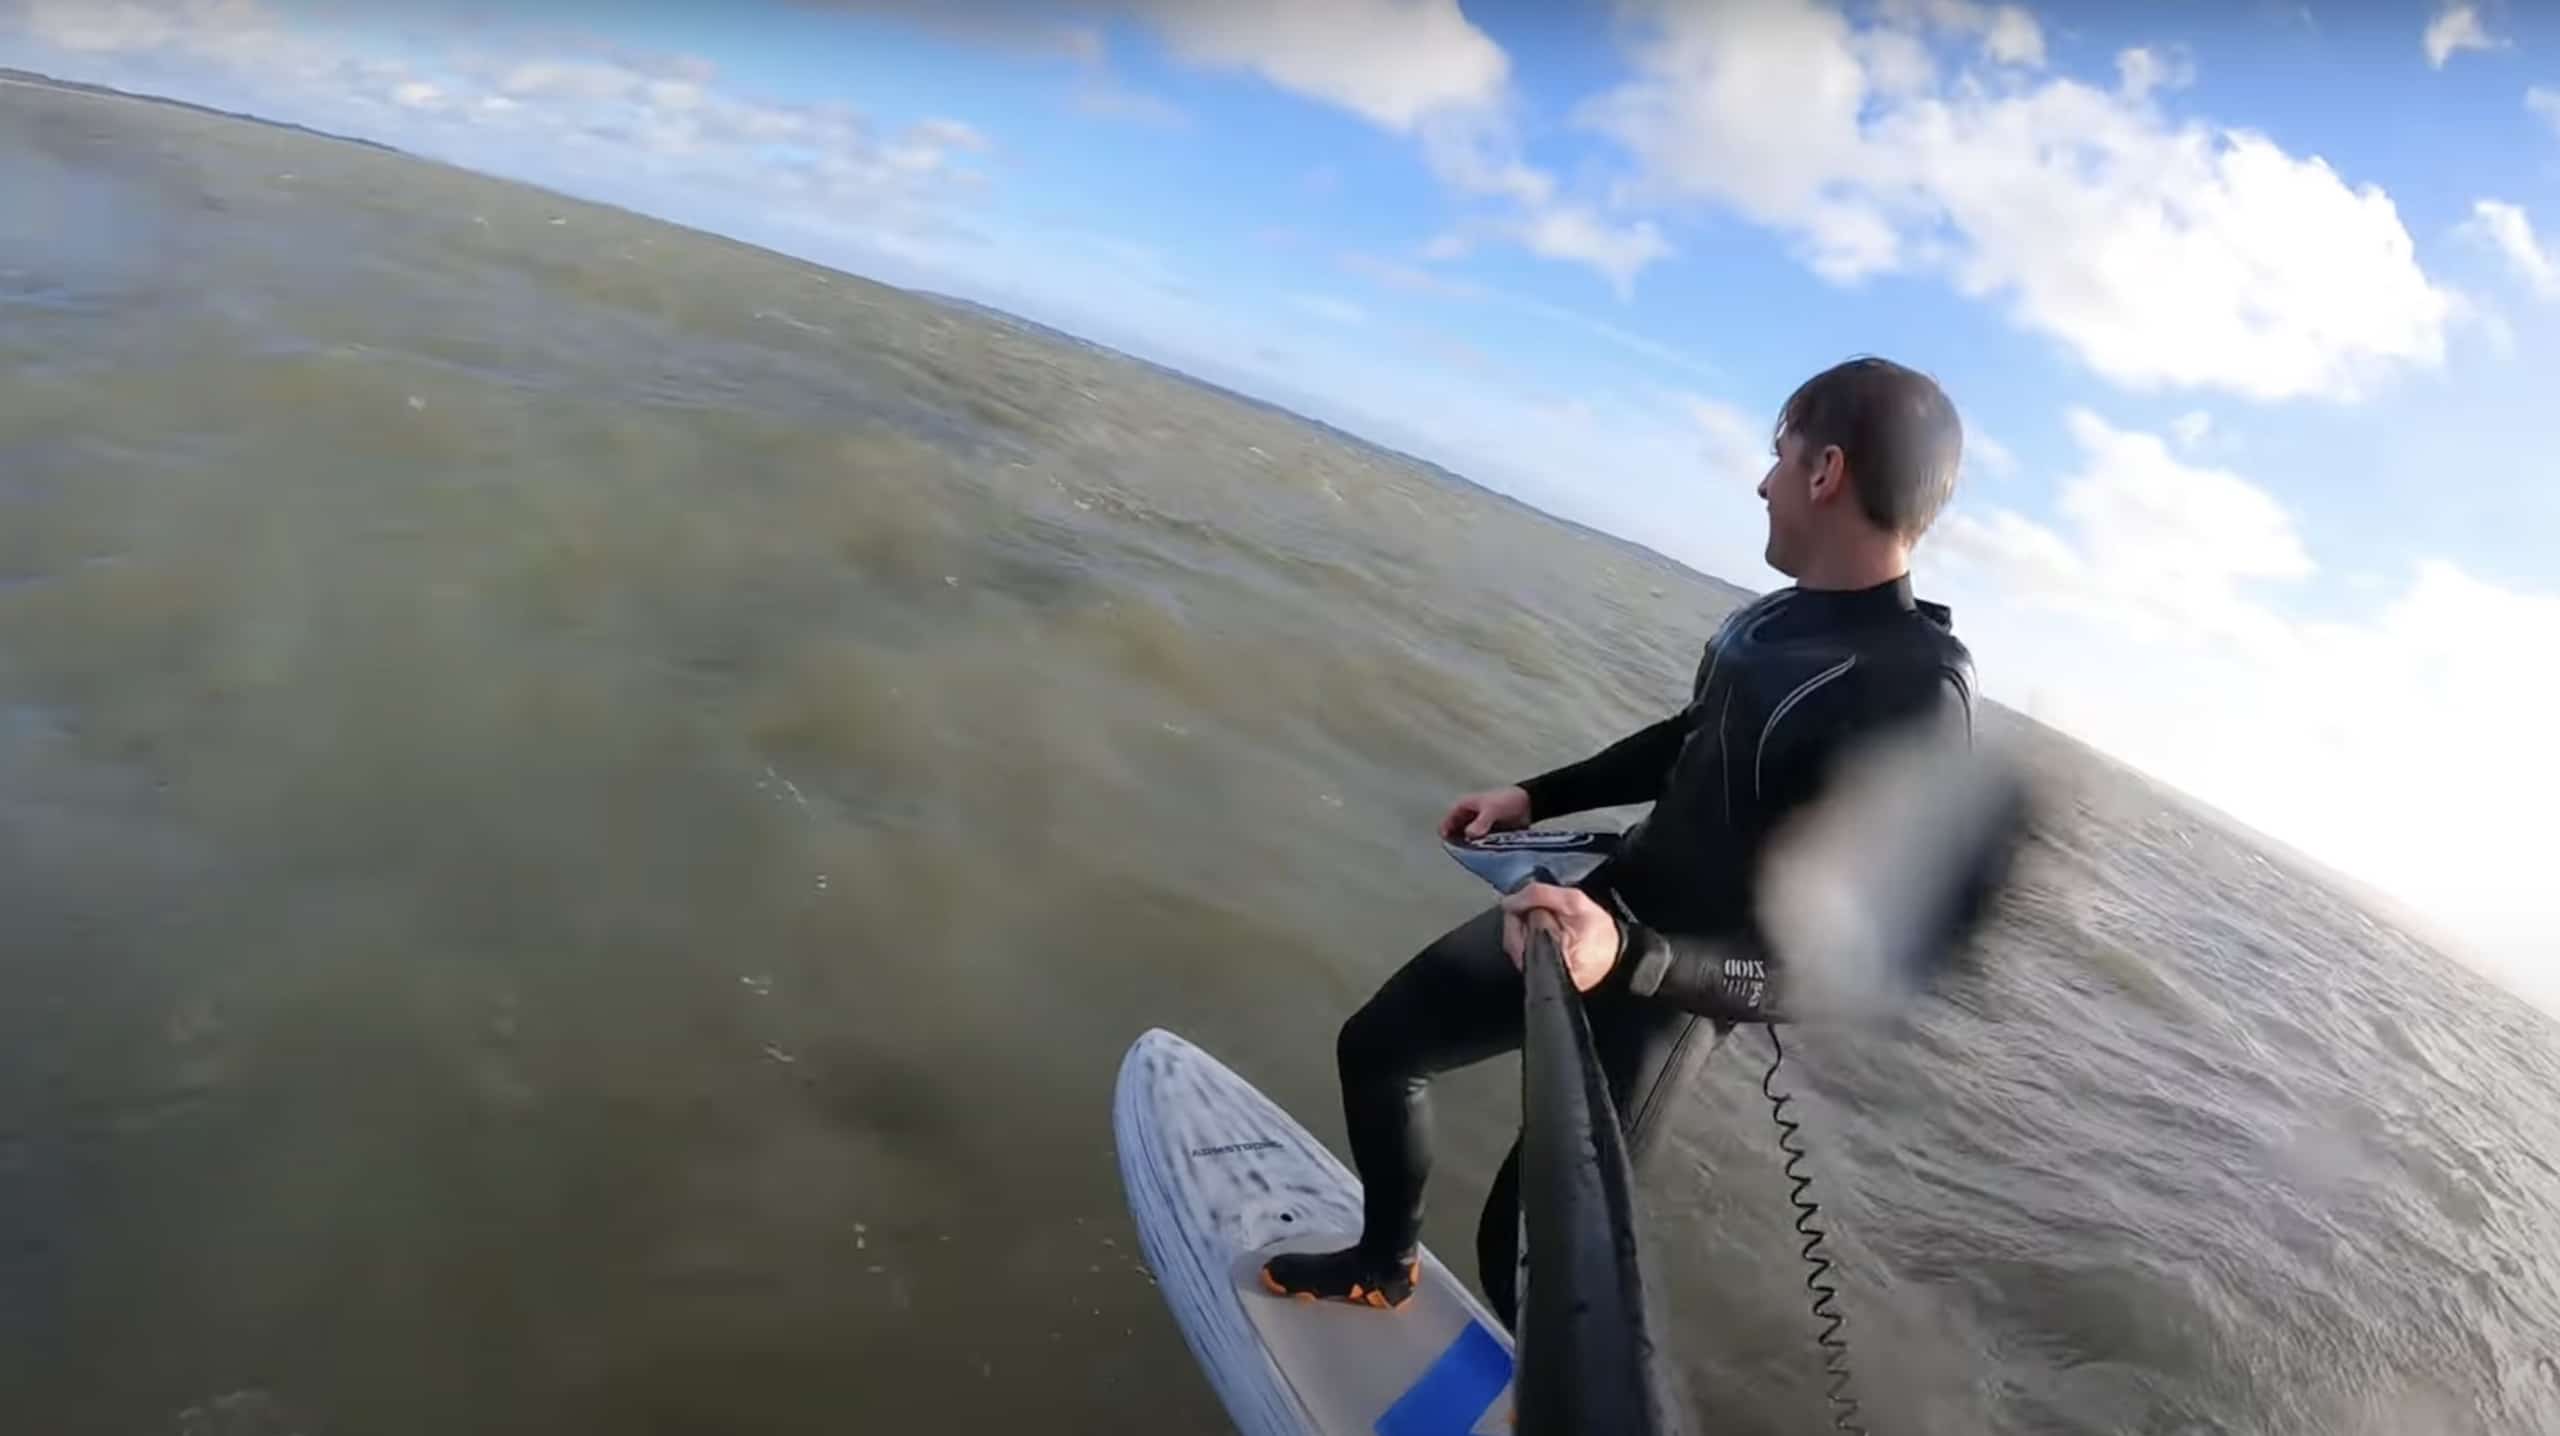 Downwind SUP Foil the UK’s version of Hood River